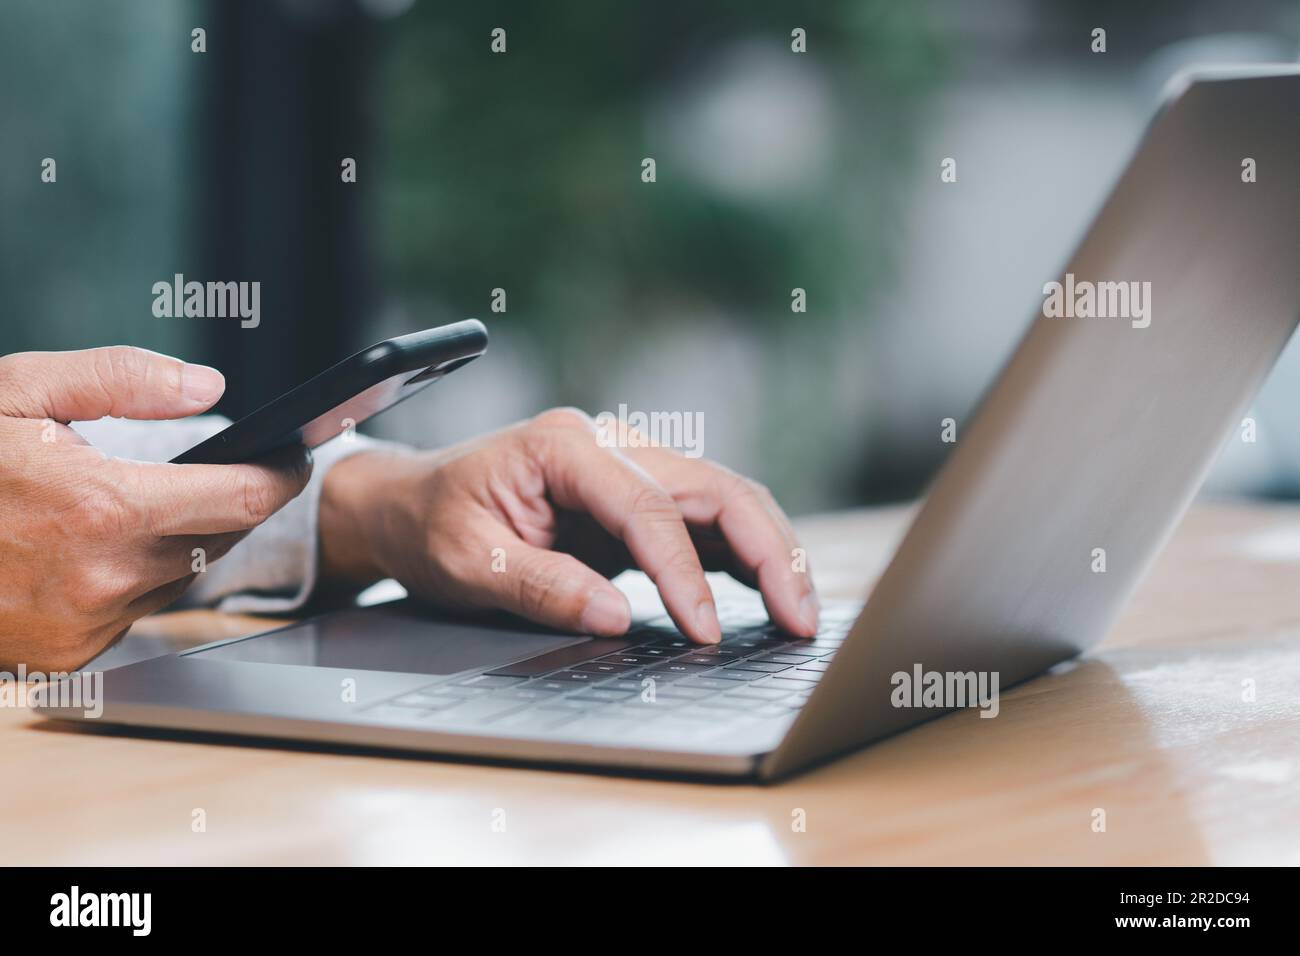 Man uses his finger to press button to turn off, closed, shut down laptop computer placed on desk, is time to finish each day before going home for sa Stock Photo